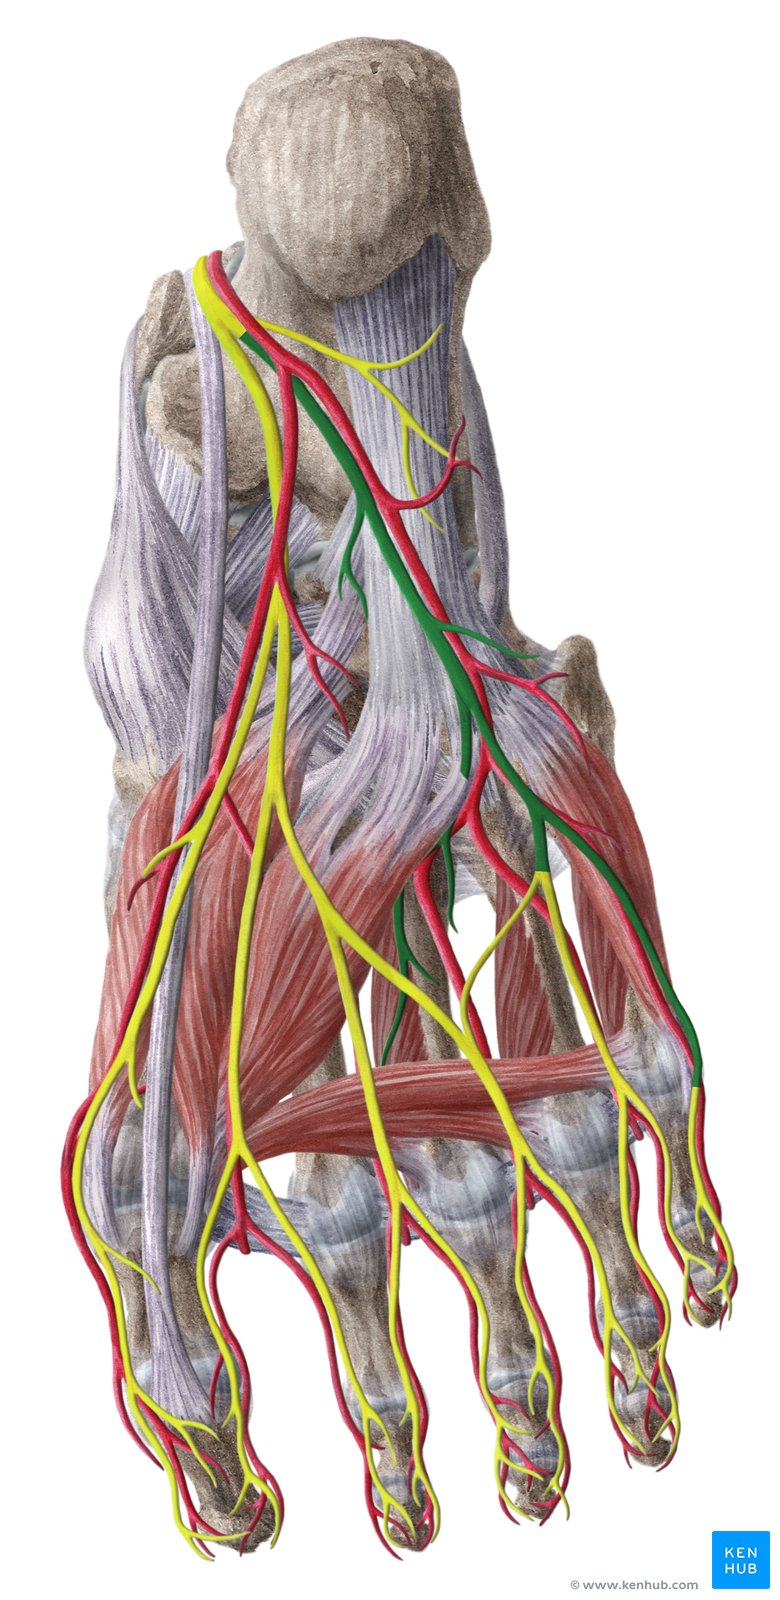 Lateral plantar nerve - inferior view